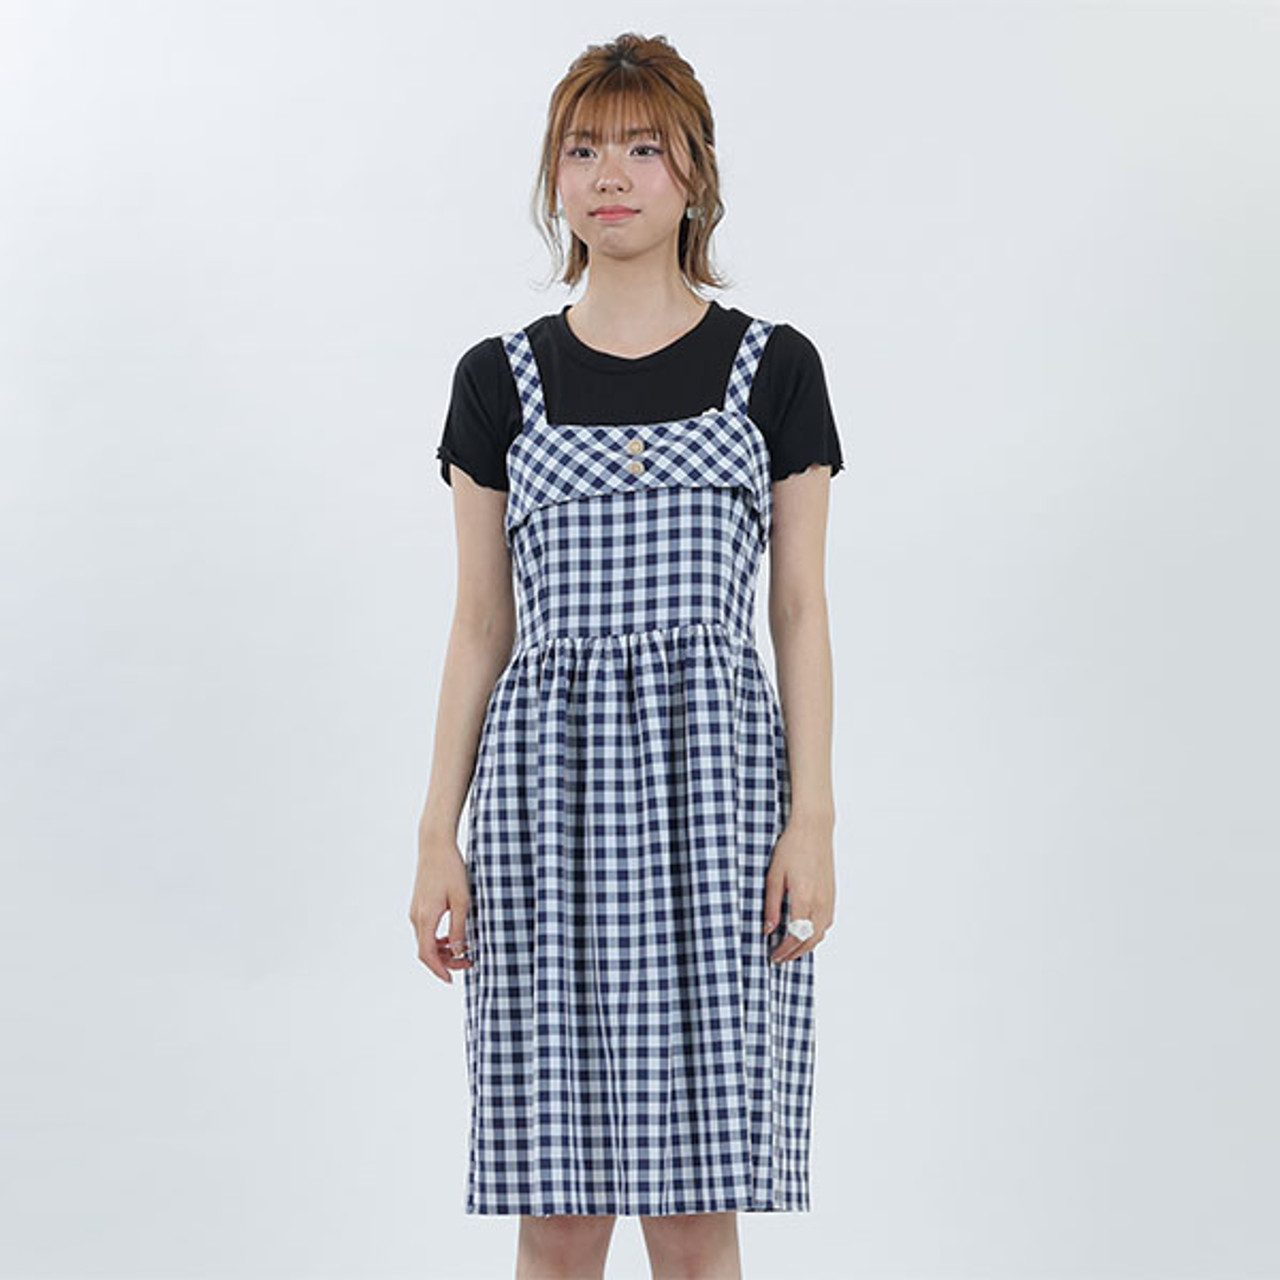 A model wearing the navy gingham sun dress. She is wearing it paired with a navy tee underneath.